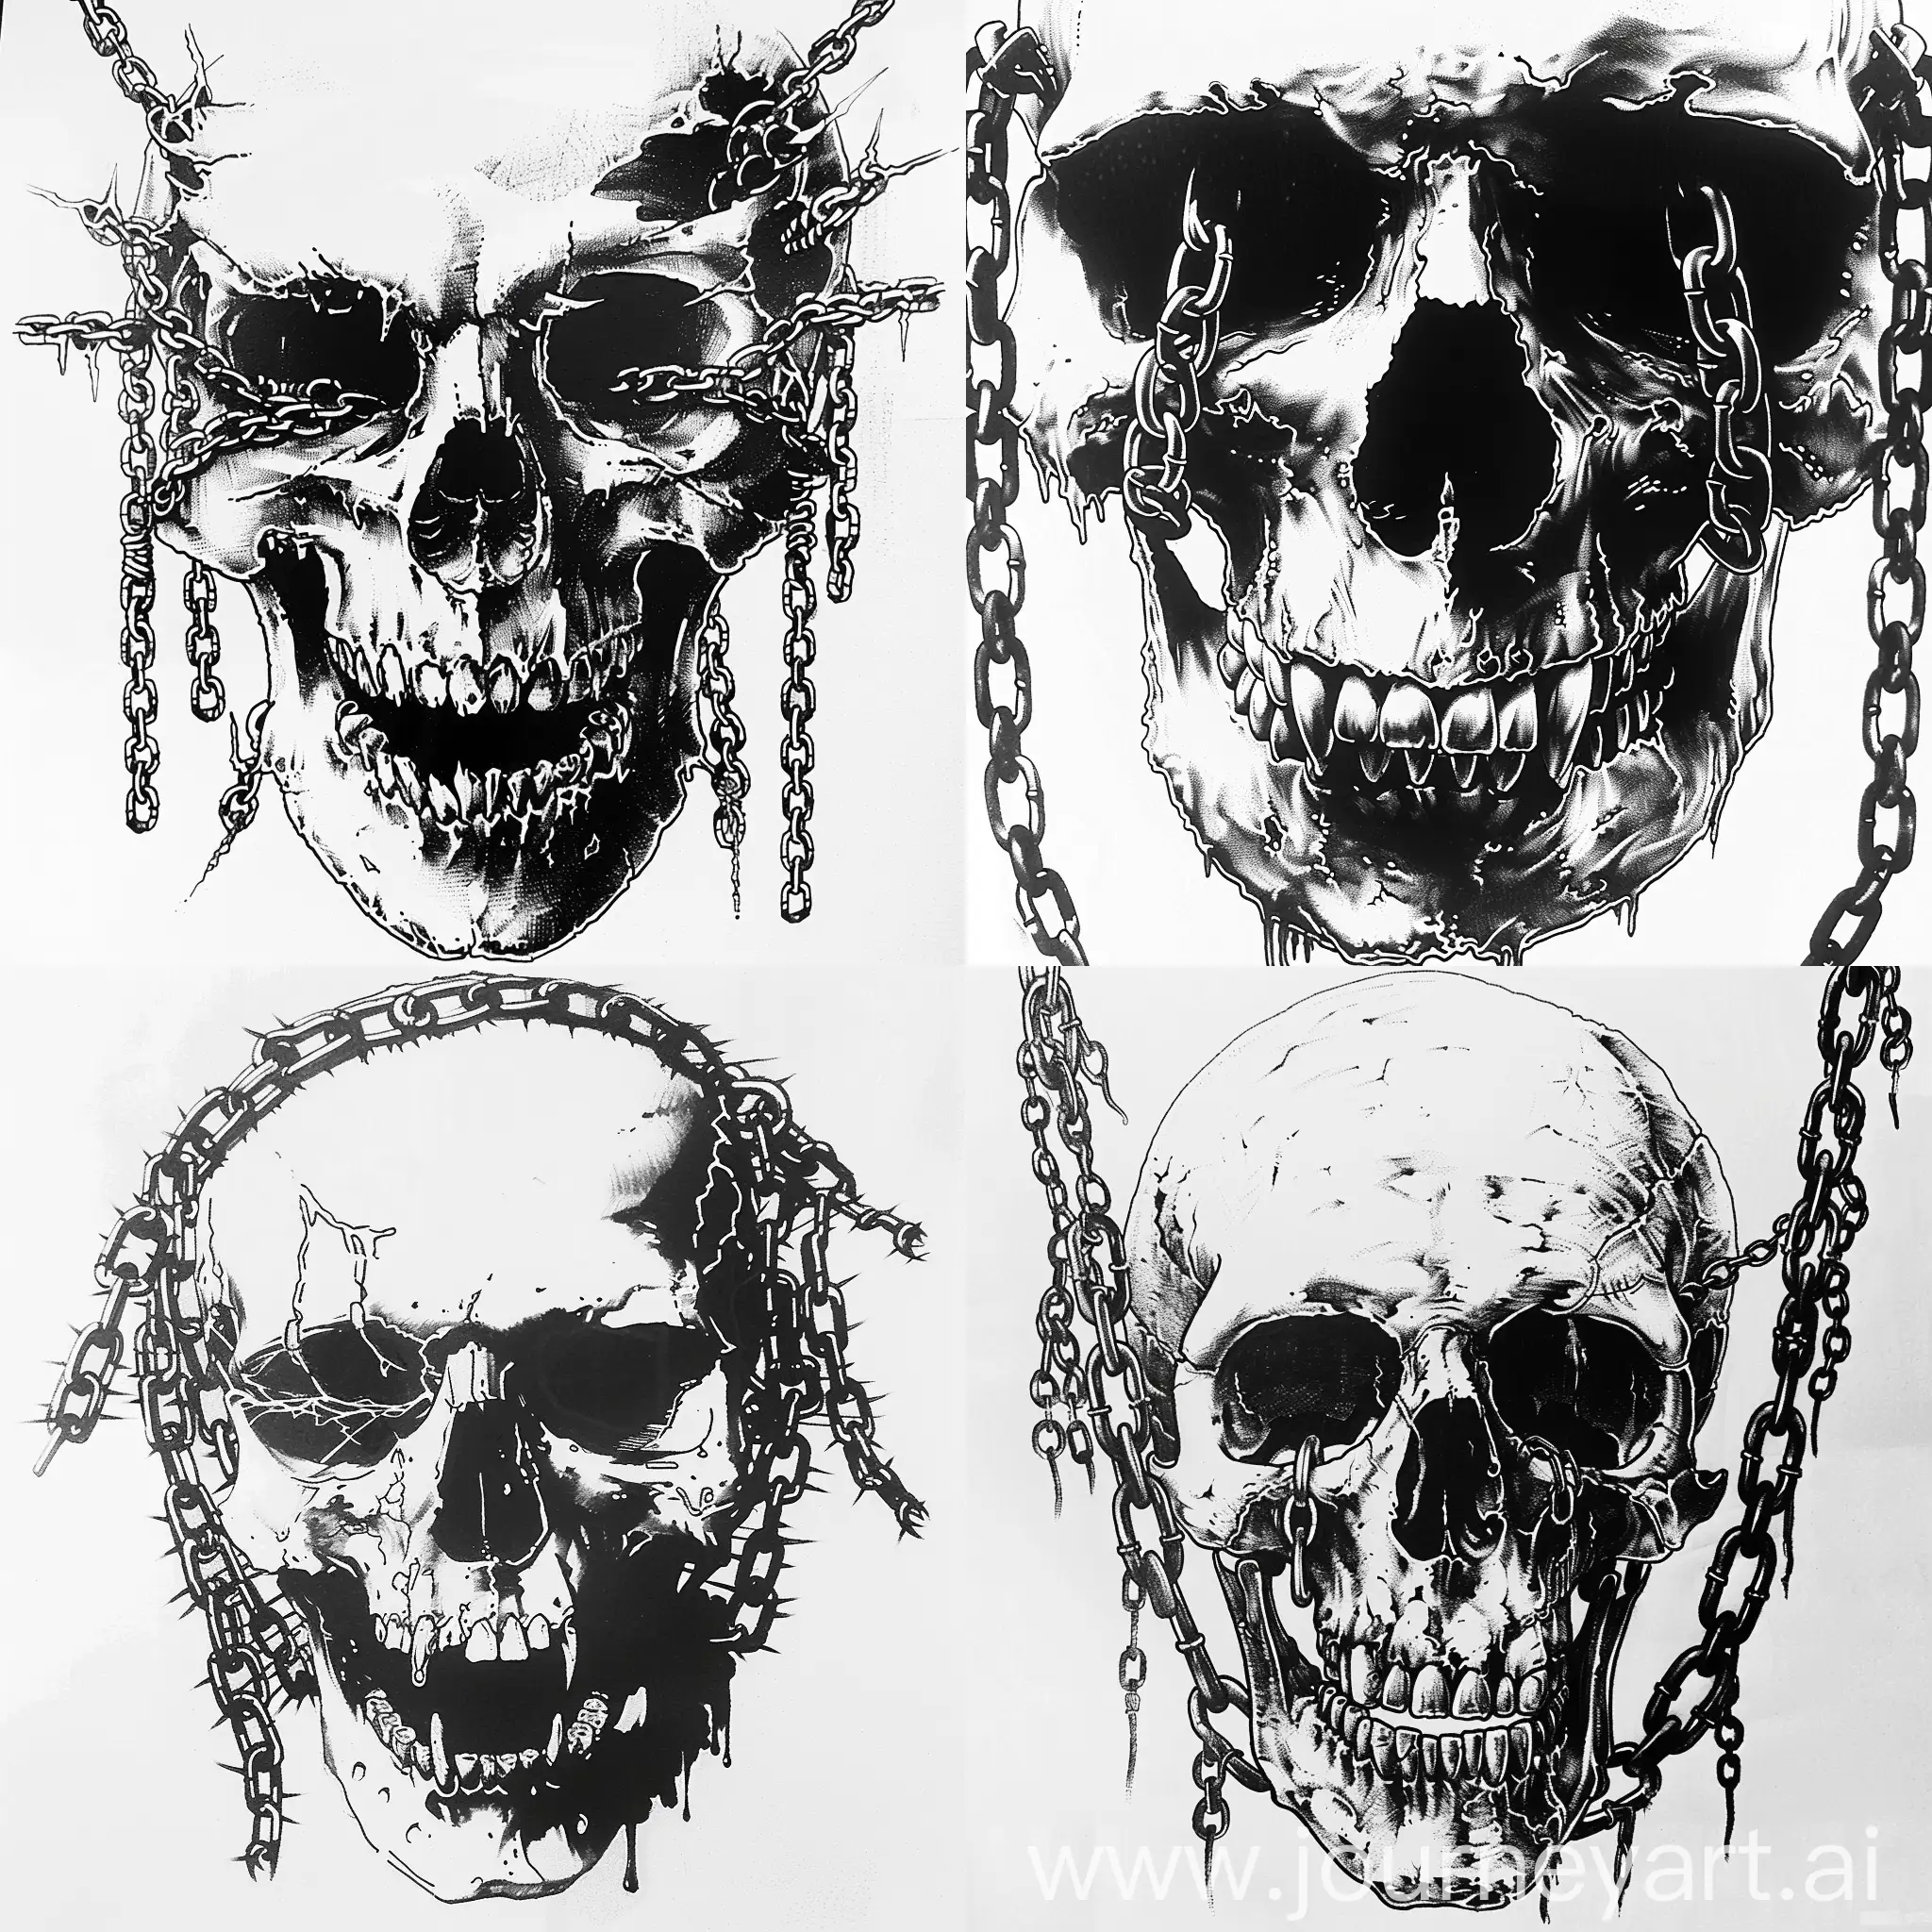 Gothic-Skull-Tattoo-Design-with-Chains-Black-and-White-Bernie-Wrightson-Style-Art